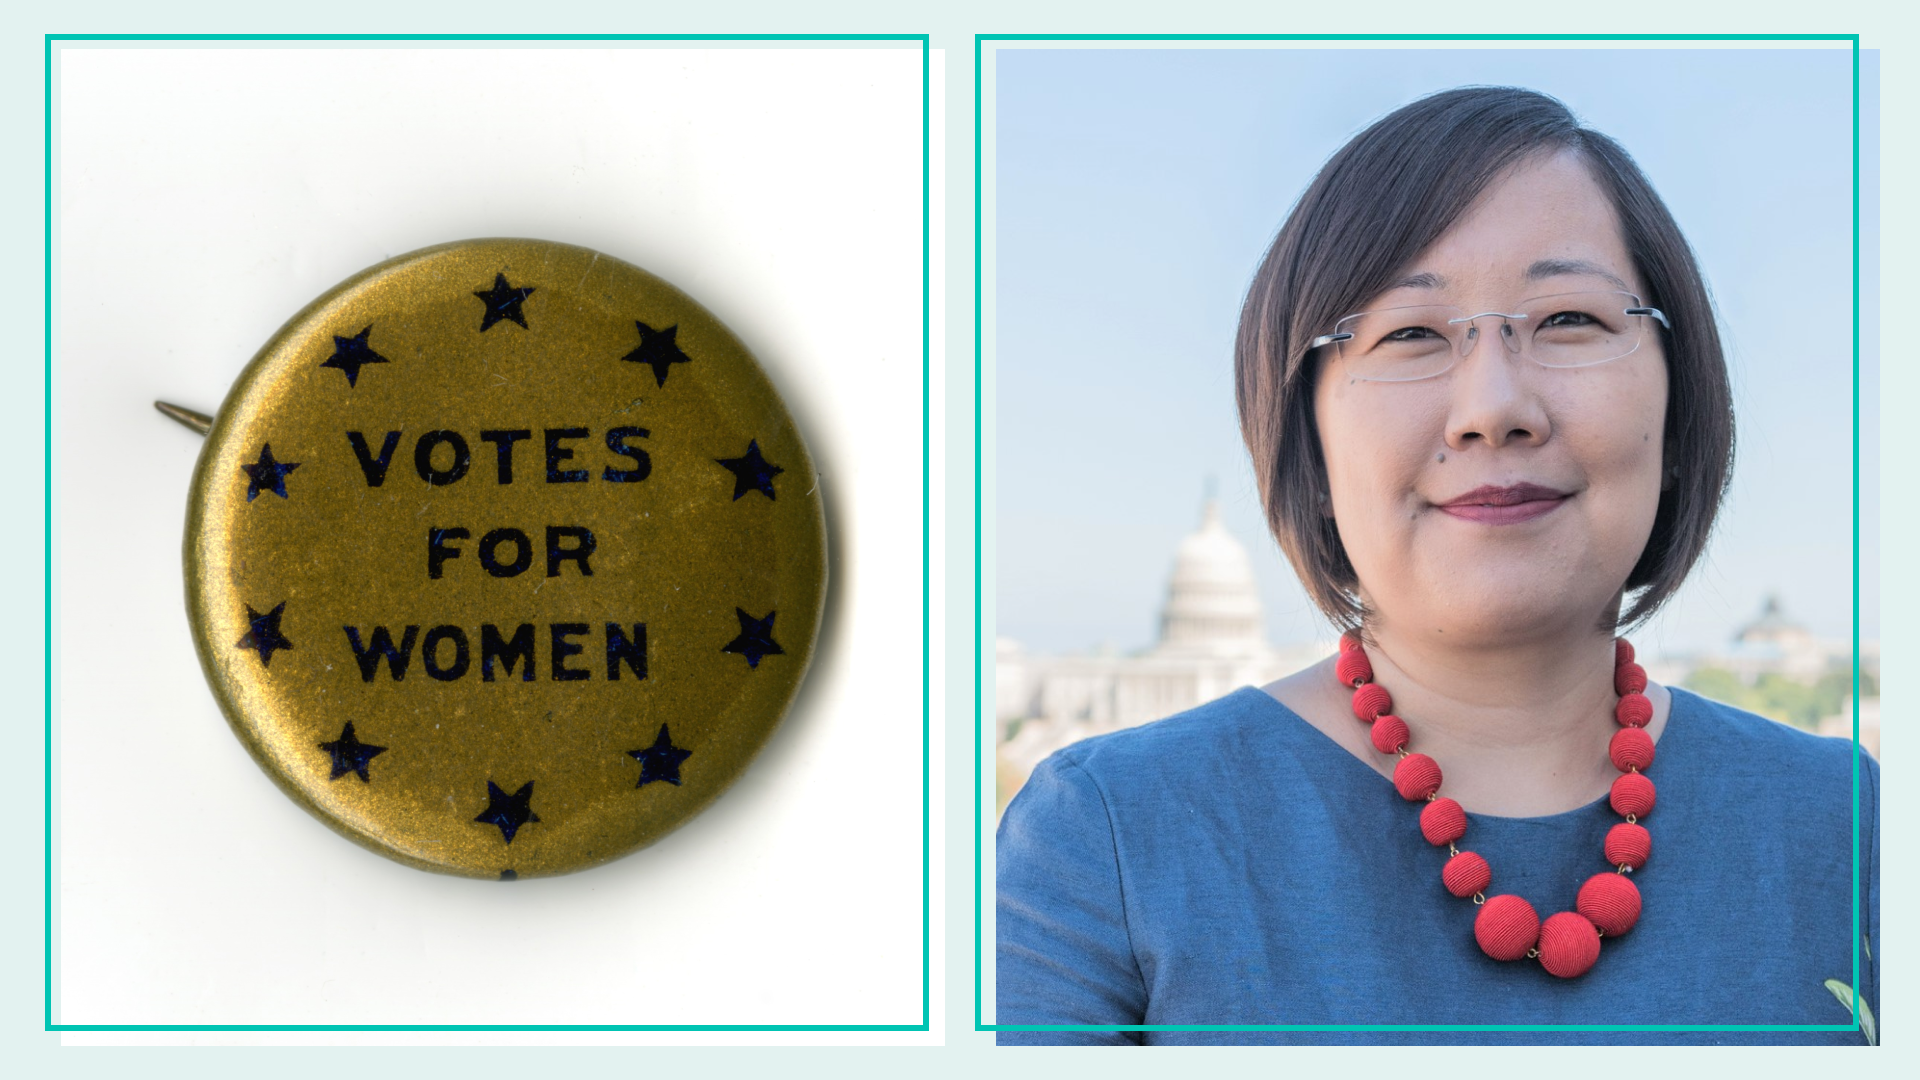 On left, pin with the text "Votes for Women" from the Library of Congress. On right, headshot of Lisa Sasaki, interim director of the Smithsonian American Women’s History Museum.